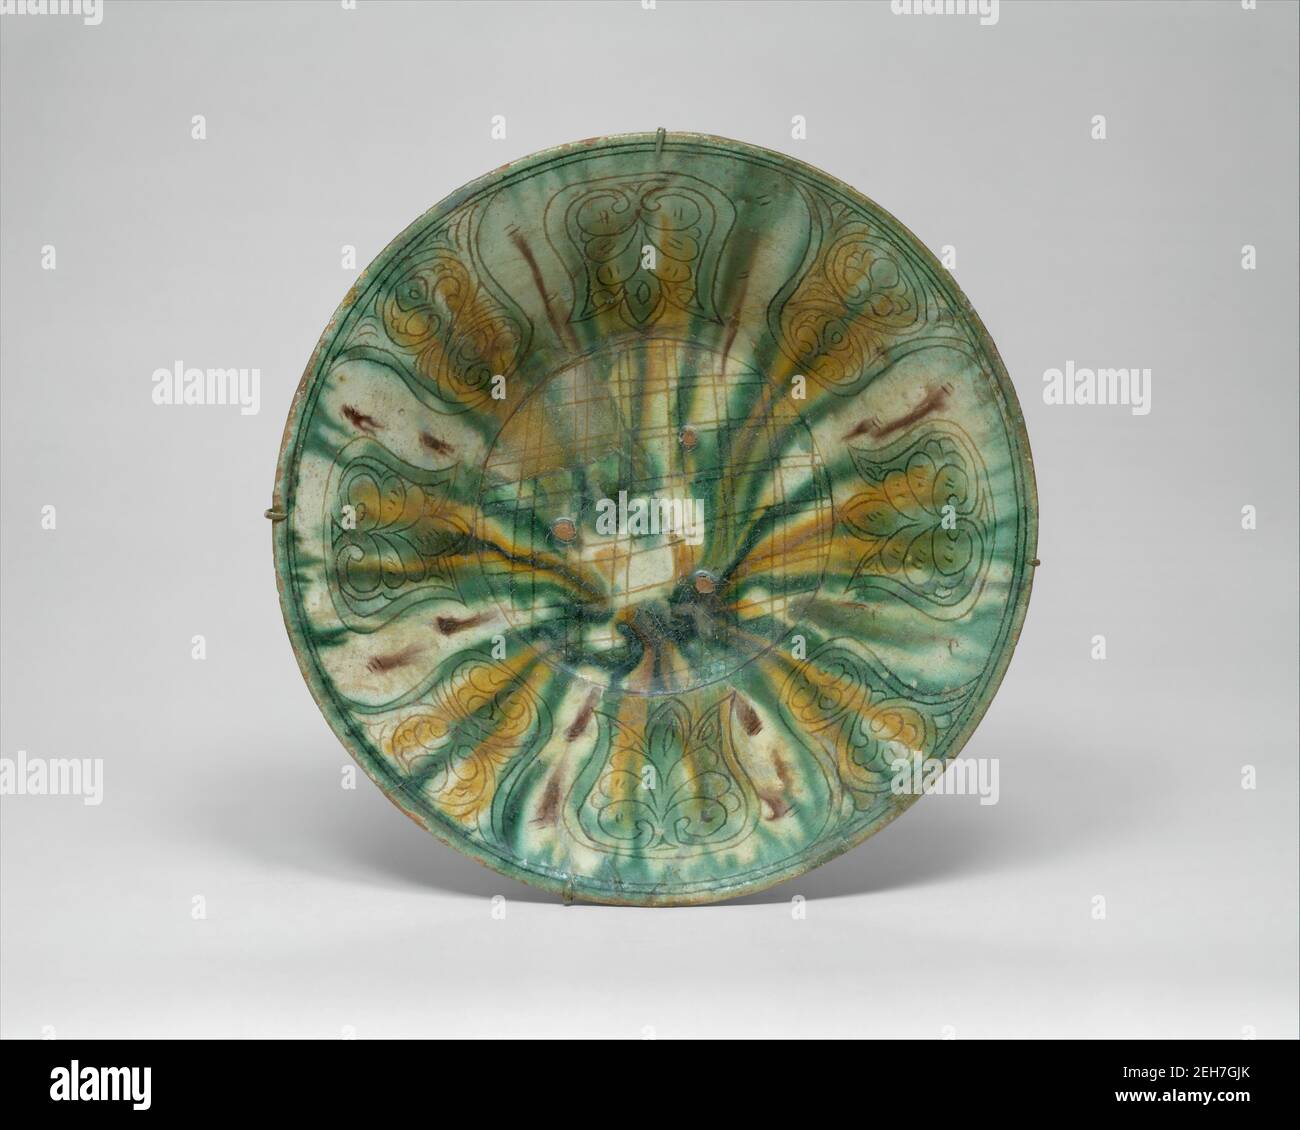 Bowl with Green, Yellow, and Brown Splashed Decoration, Iran, 10th century. Stock Photo